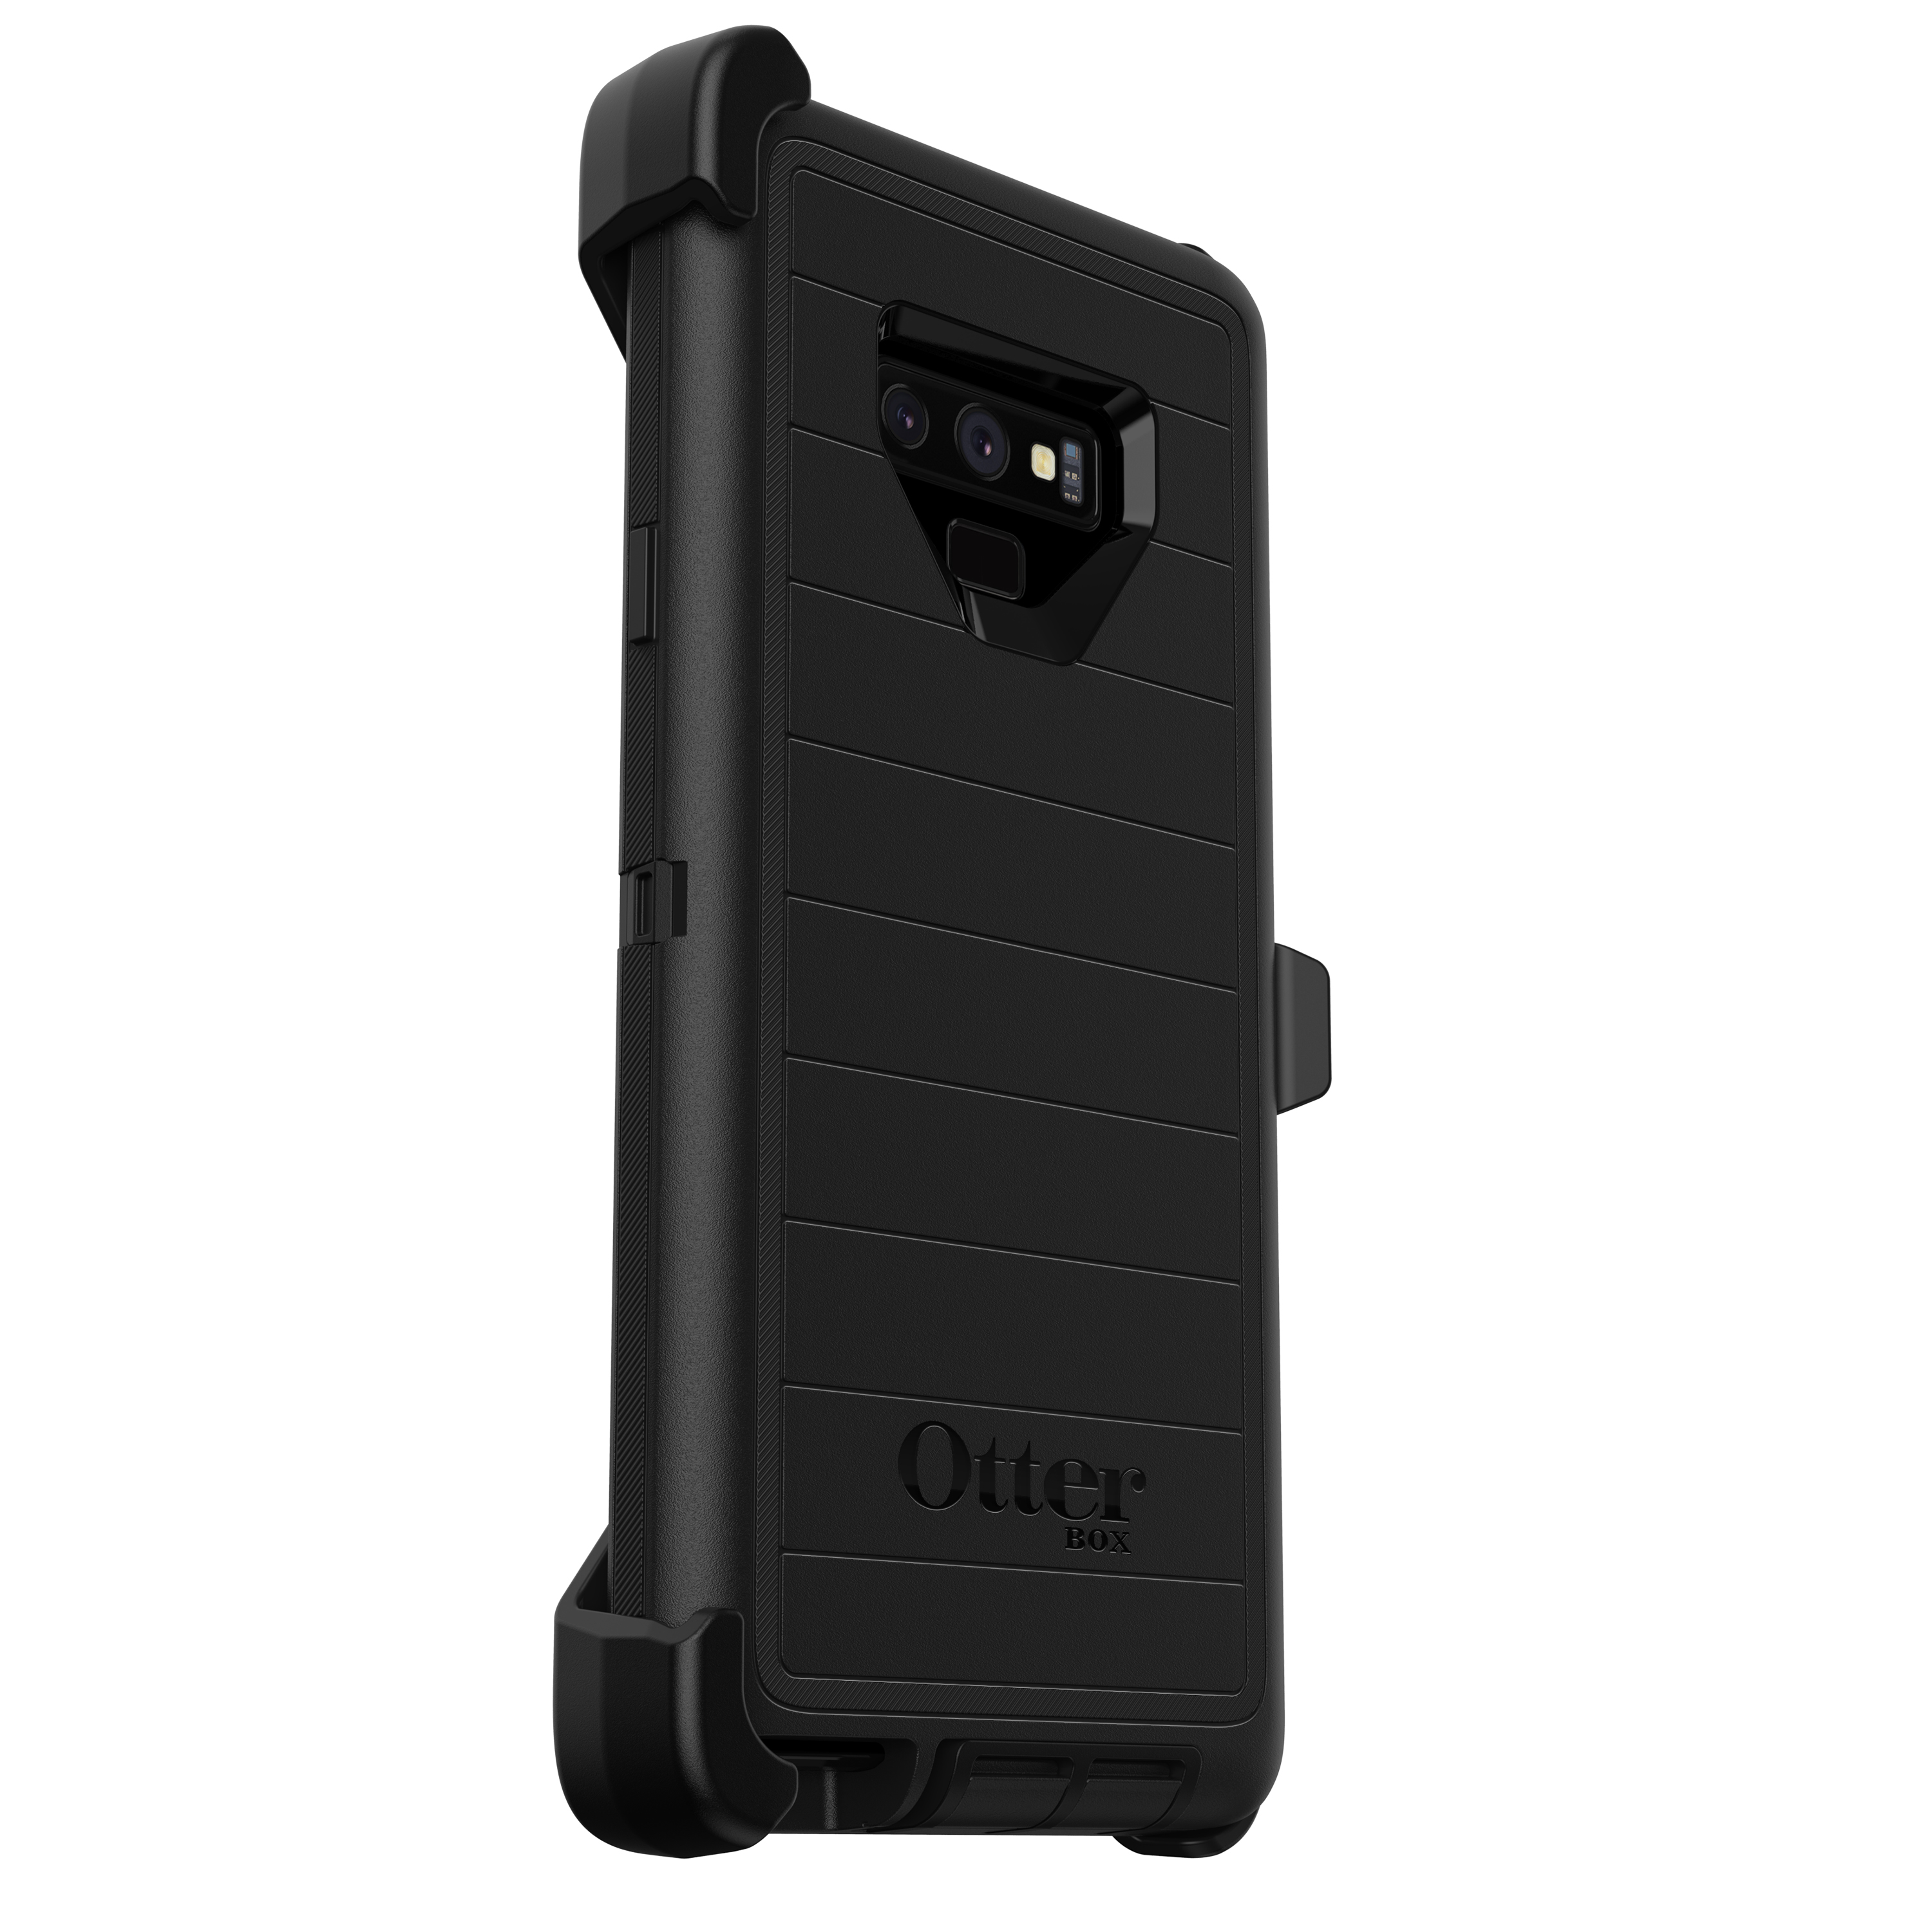 OtterBox Defender Series Pro Phone Case for Samsung Galaxy Note 9 - Black - image 2 of 10